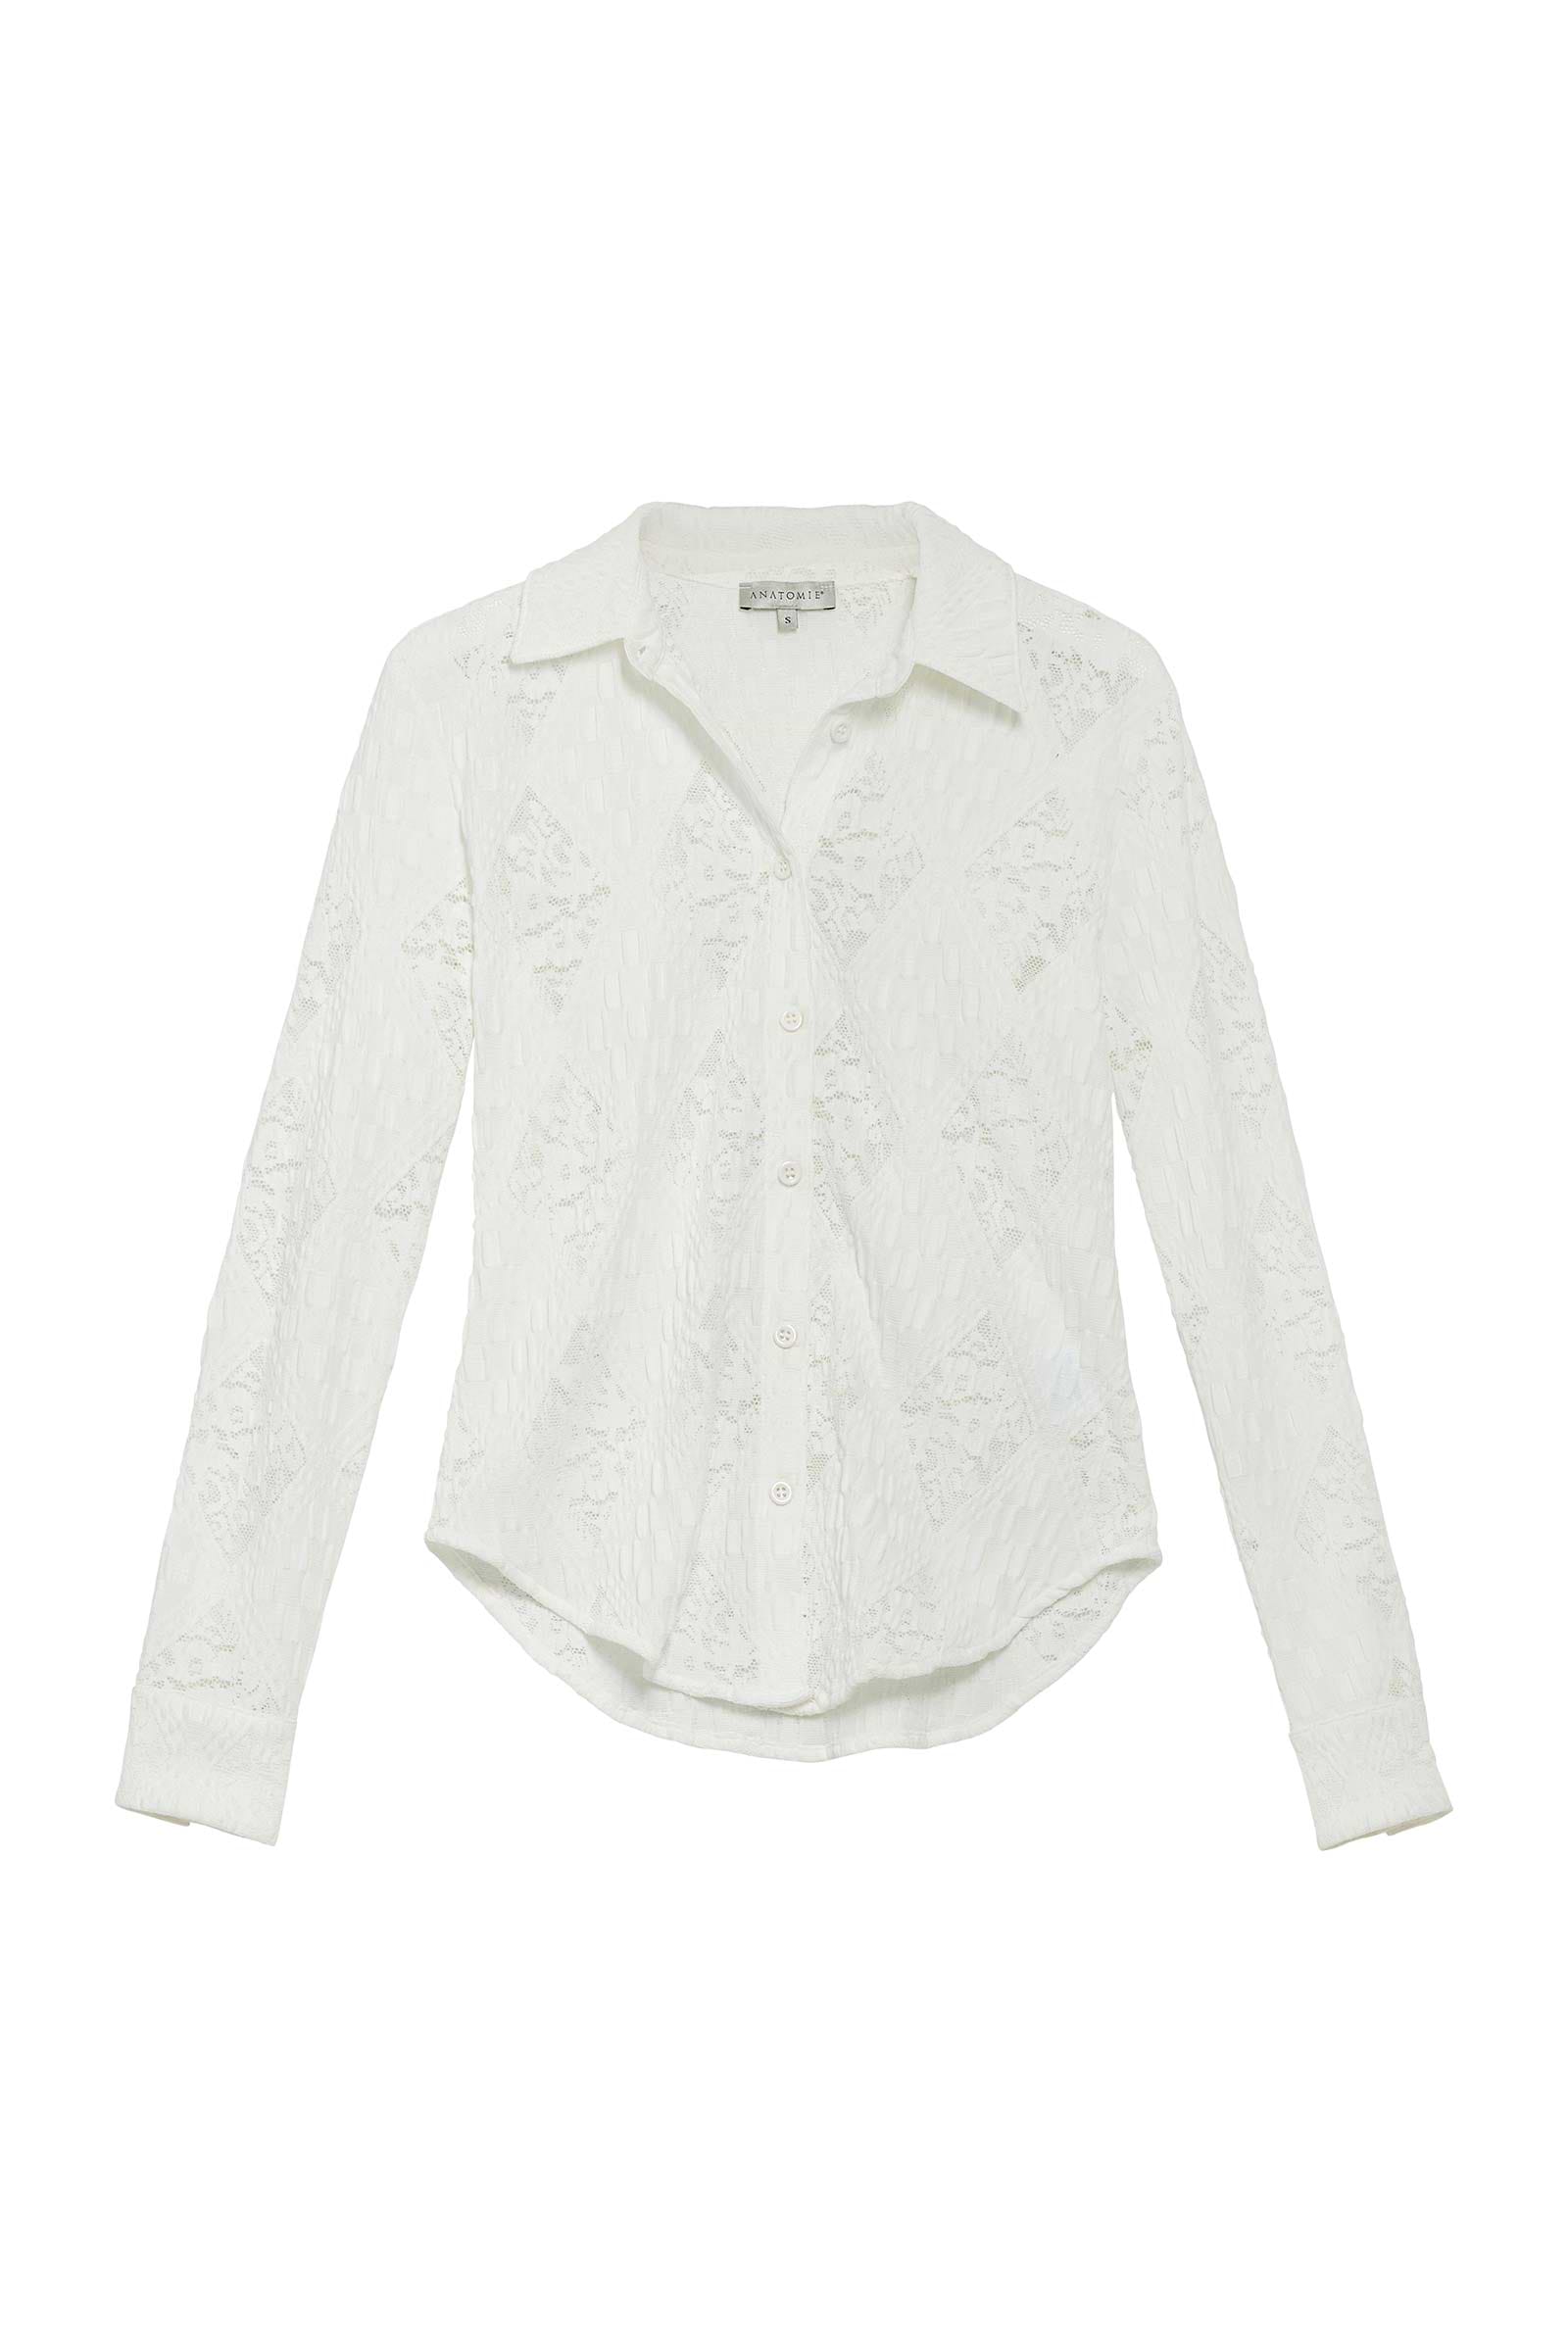 The Best Travel Top. Flat Lay of a Lace Taylee Top in White.